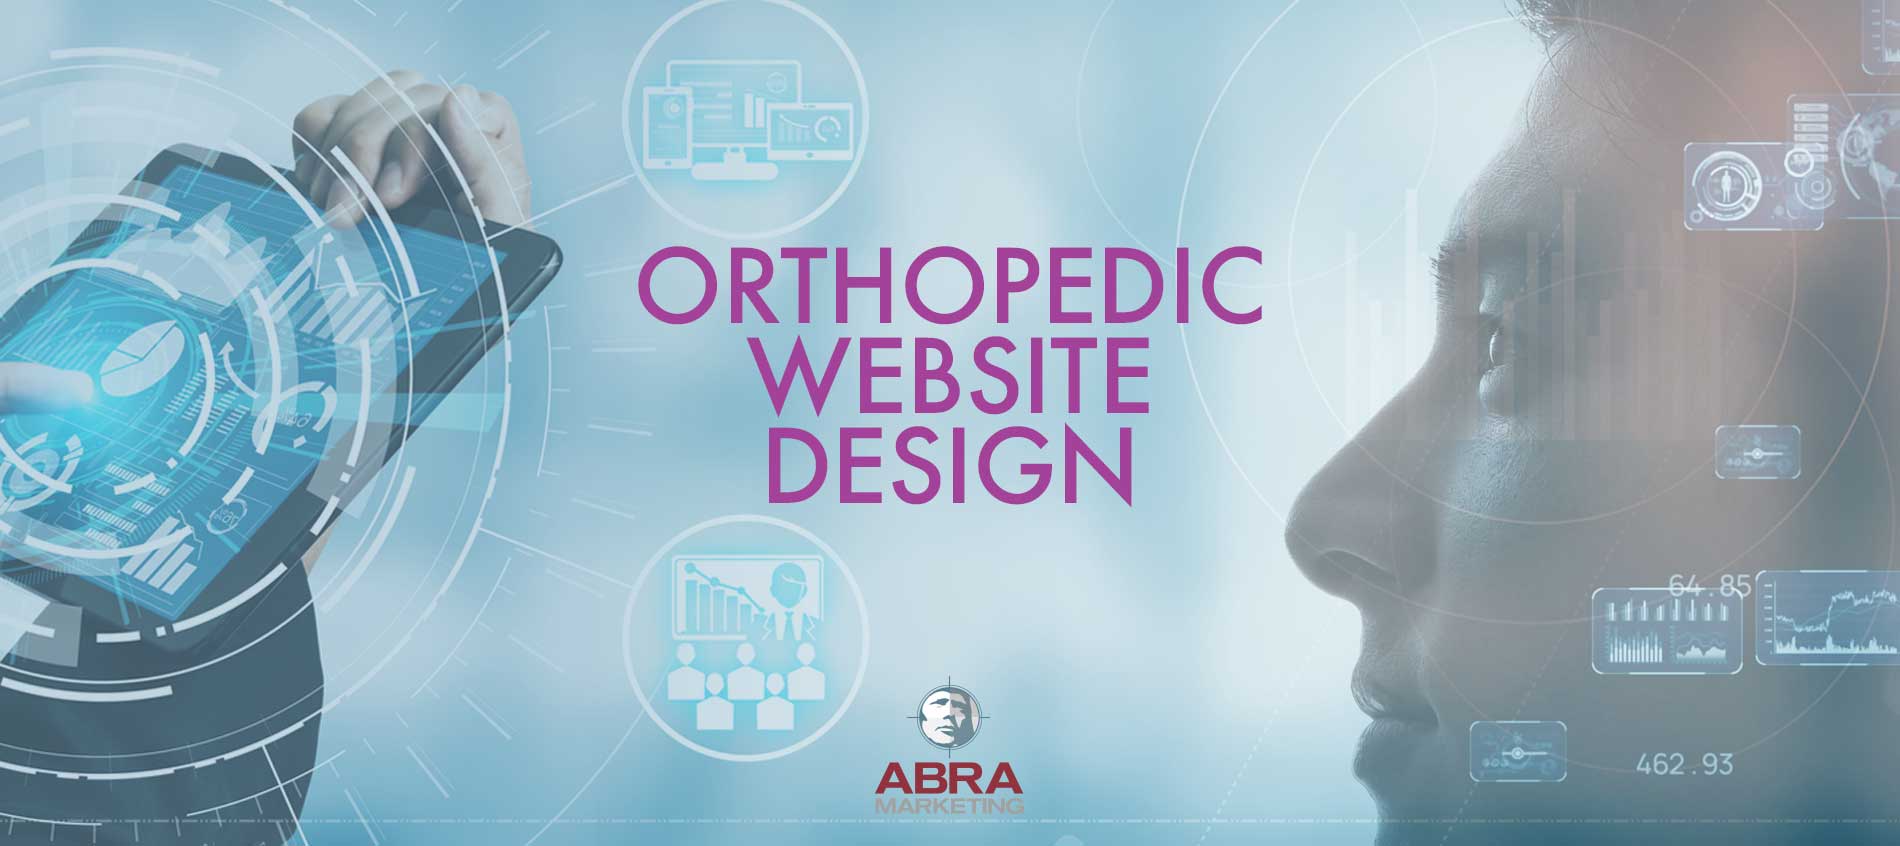 Orthopedic website design graphic, showing an orthopedic patient on the right looking toward website design elements around the text "orthopedic website design."